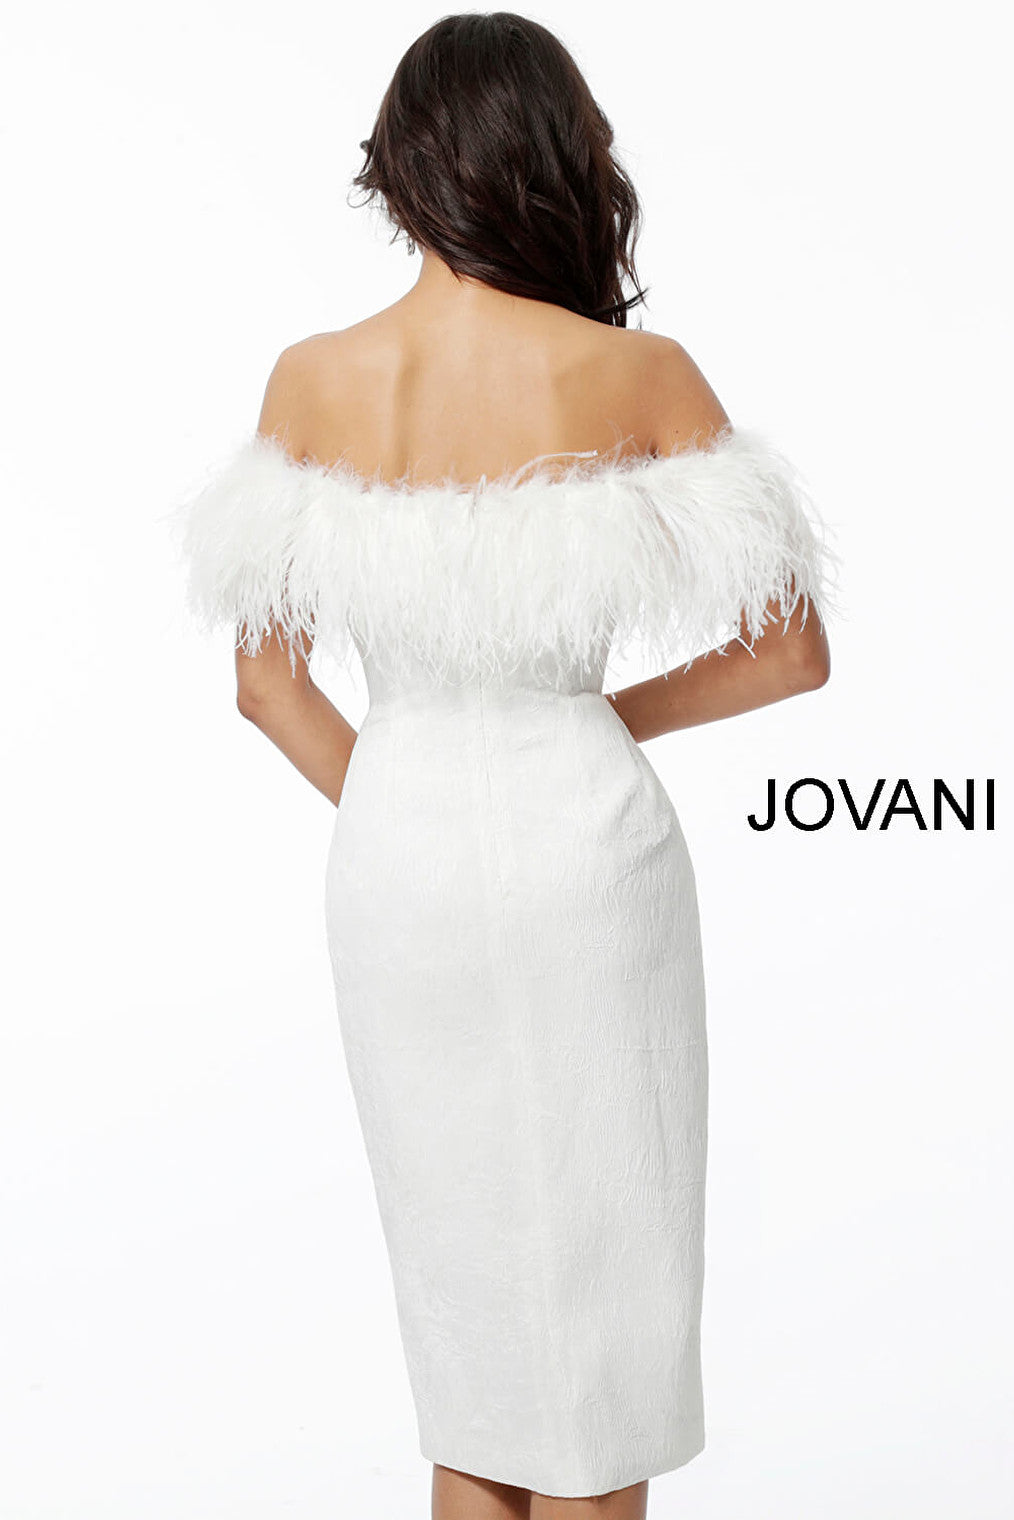 white short wedding dress with feathers 67118 